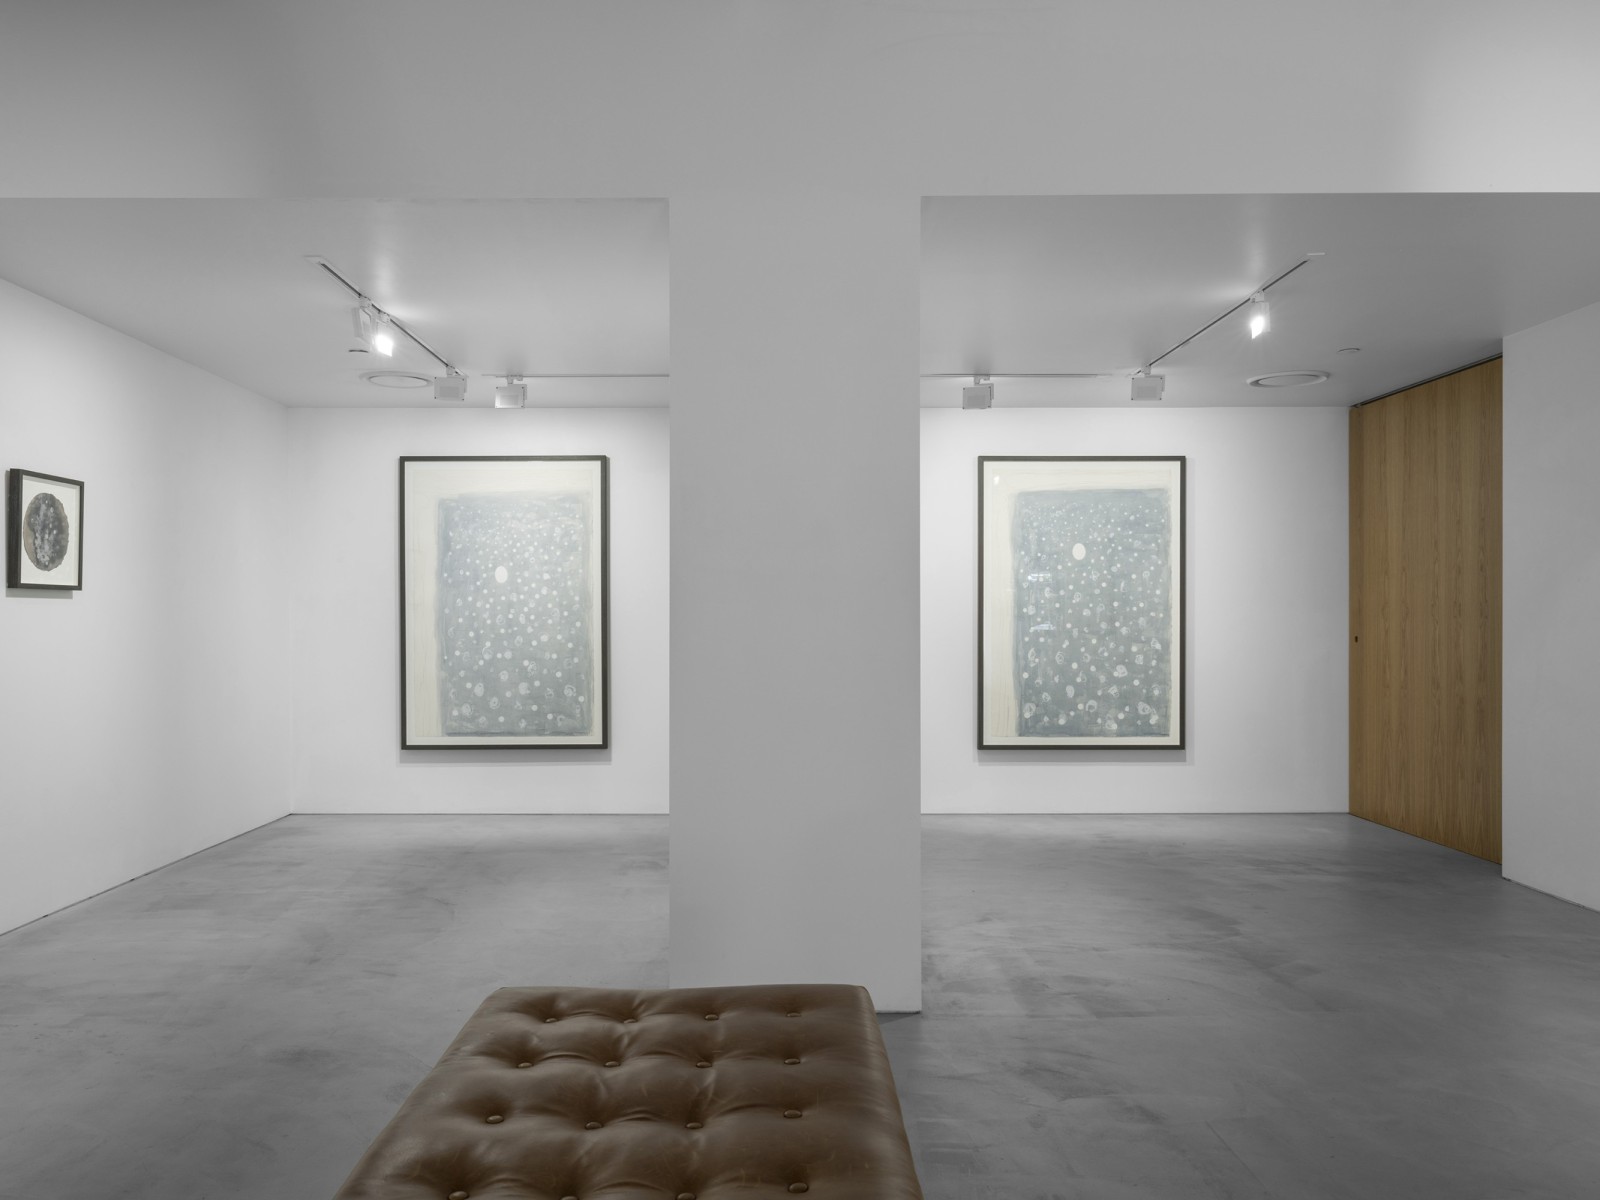 Two large and soft grey rectangular works hang upright on the far wall of a gallery, a small darker and circular work hangs to the left